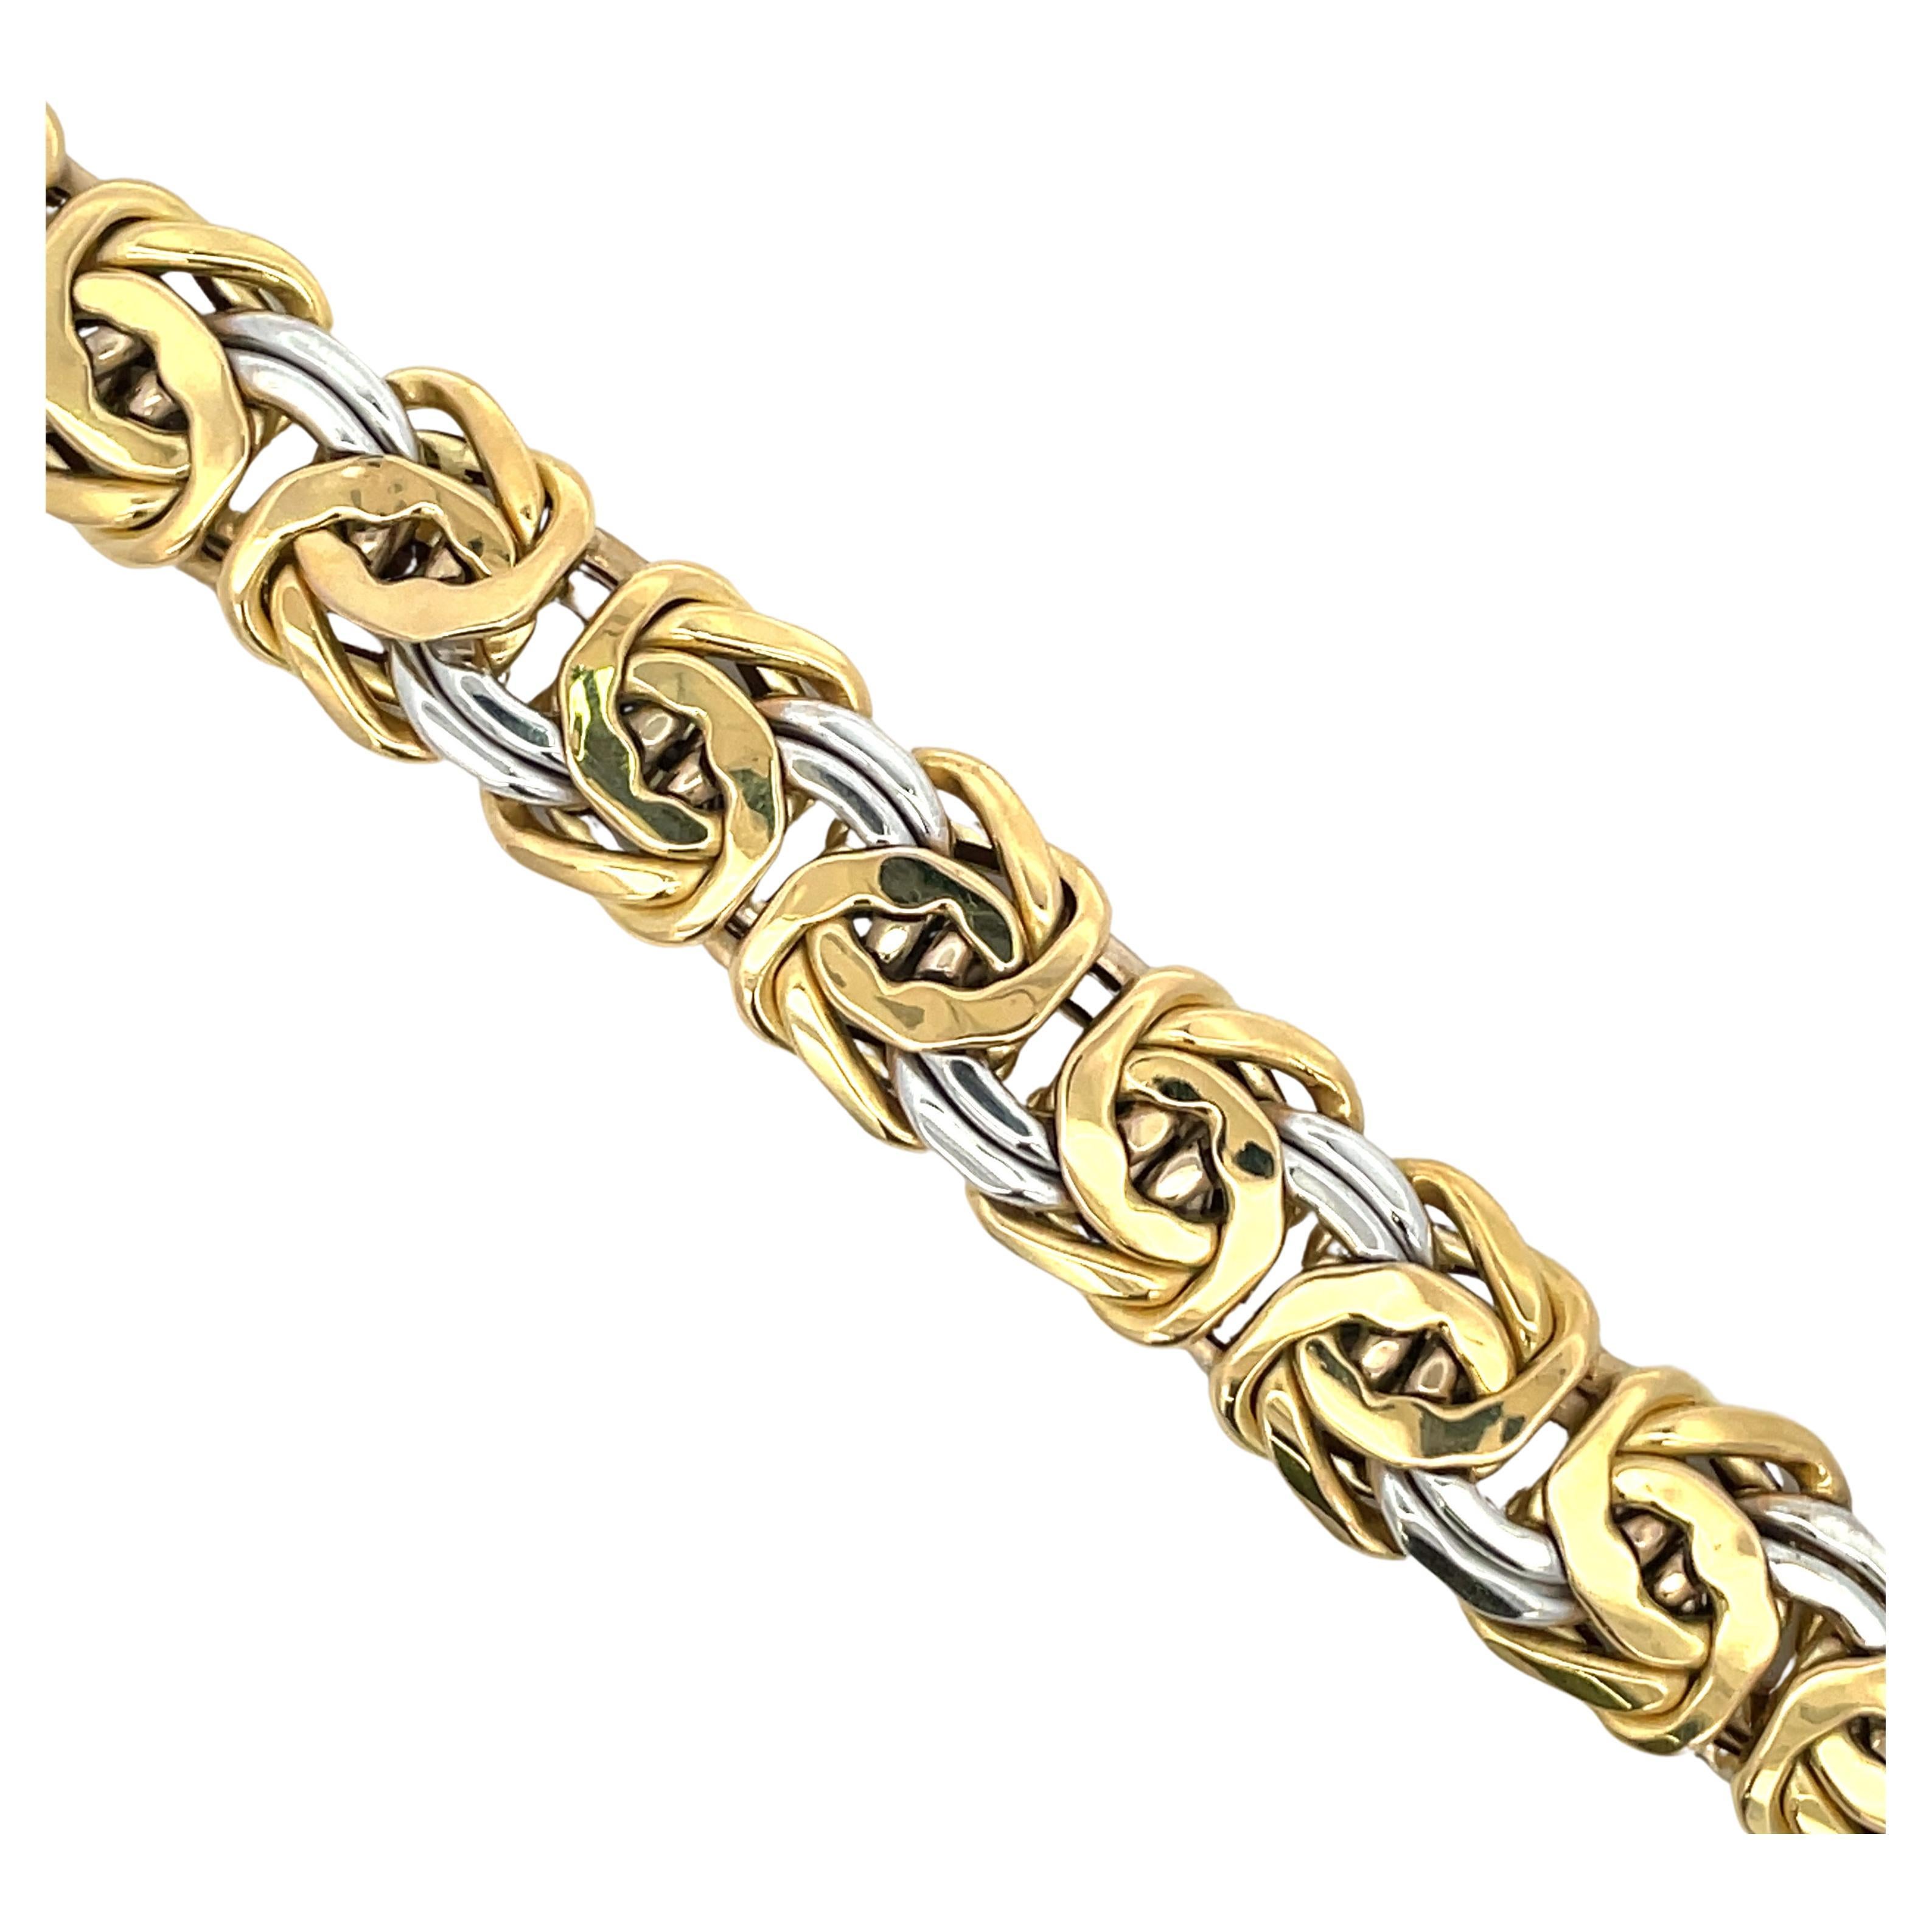 Byzantine style motif bracelet featuring two tone of 18 karat yellow and white gold weighing 31.9 Grams
Stamped 750 AR *389
More link bracelets available.
Search Harbor Diamonds

DM for more videos and pictures